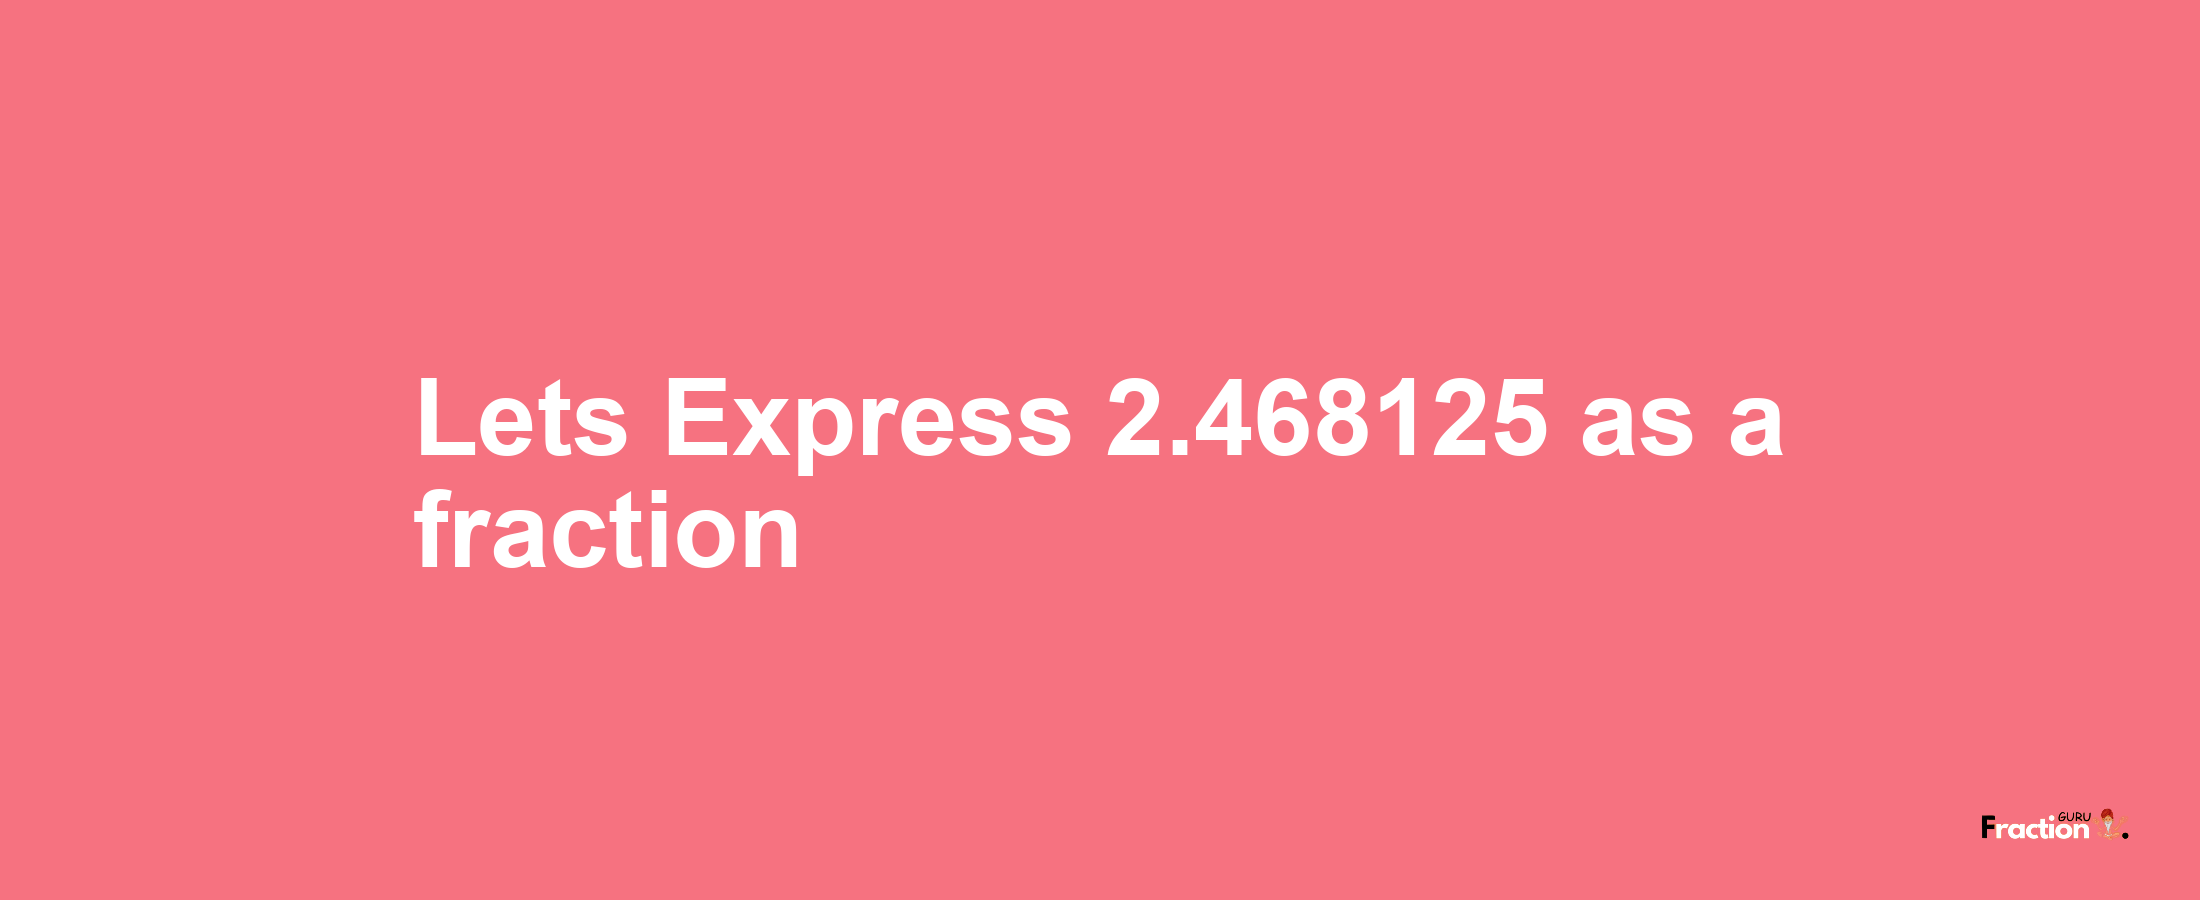 Lets Express 2.468125 as afraction